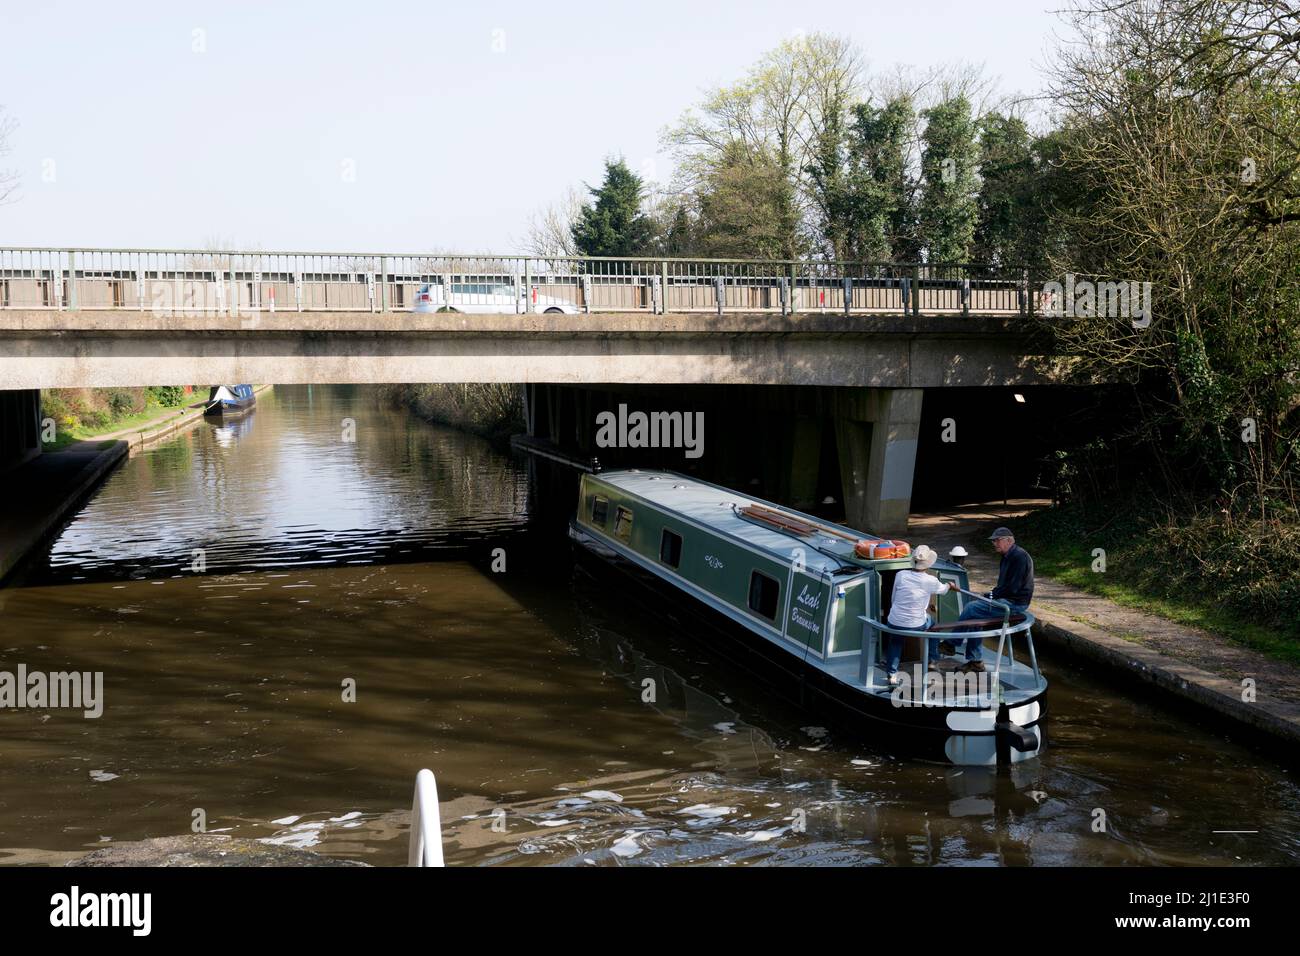 A narrowboat on the Grand Union Canal passing under the A46 road, Warwick, Warwickshire, UK Stock Photo